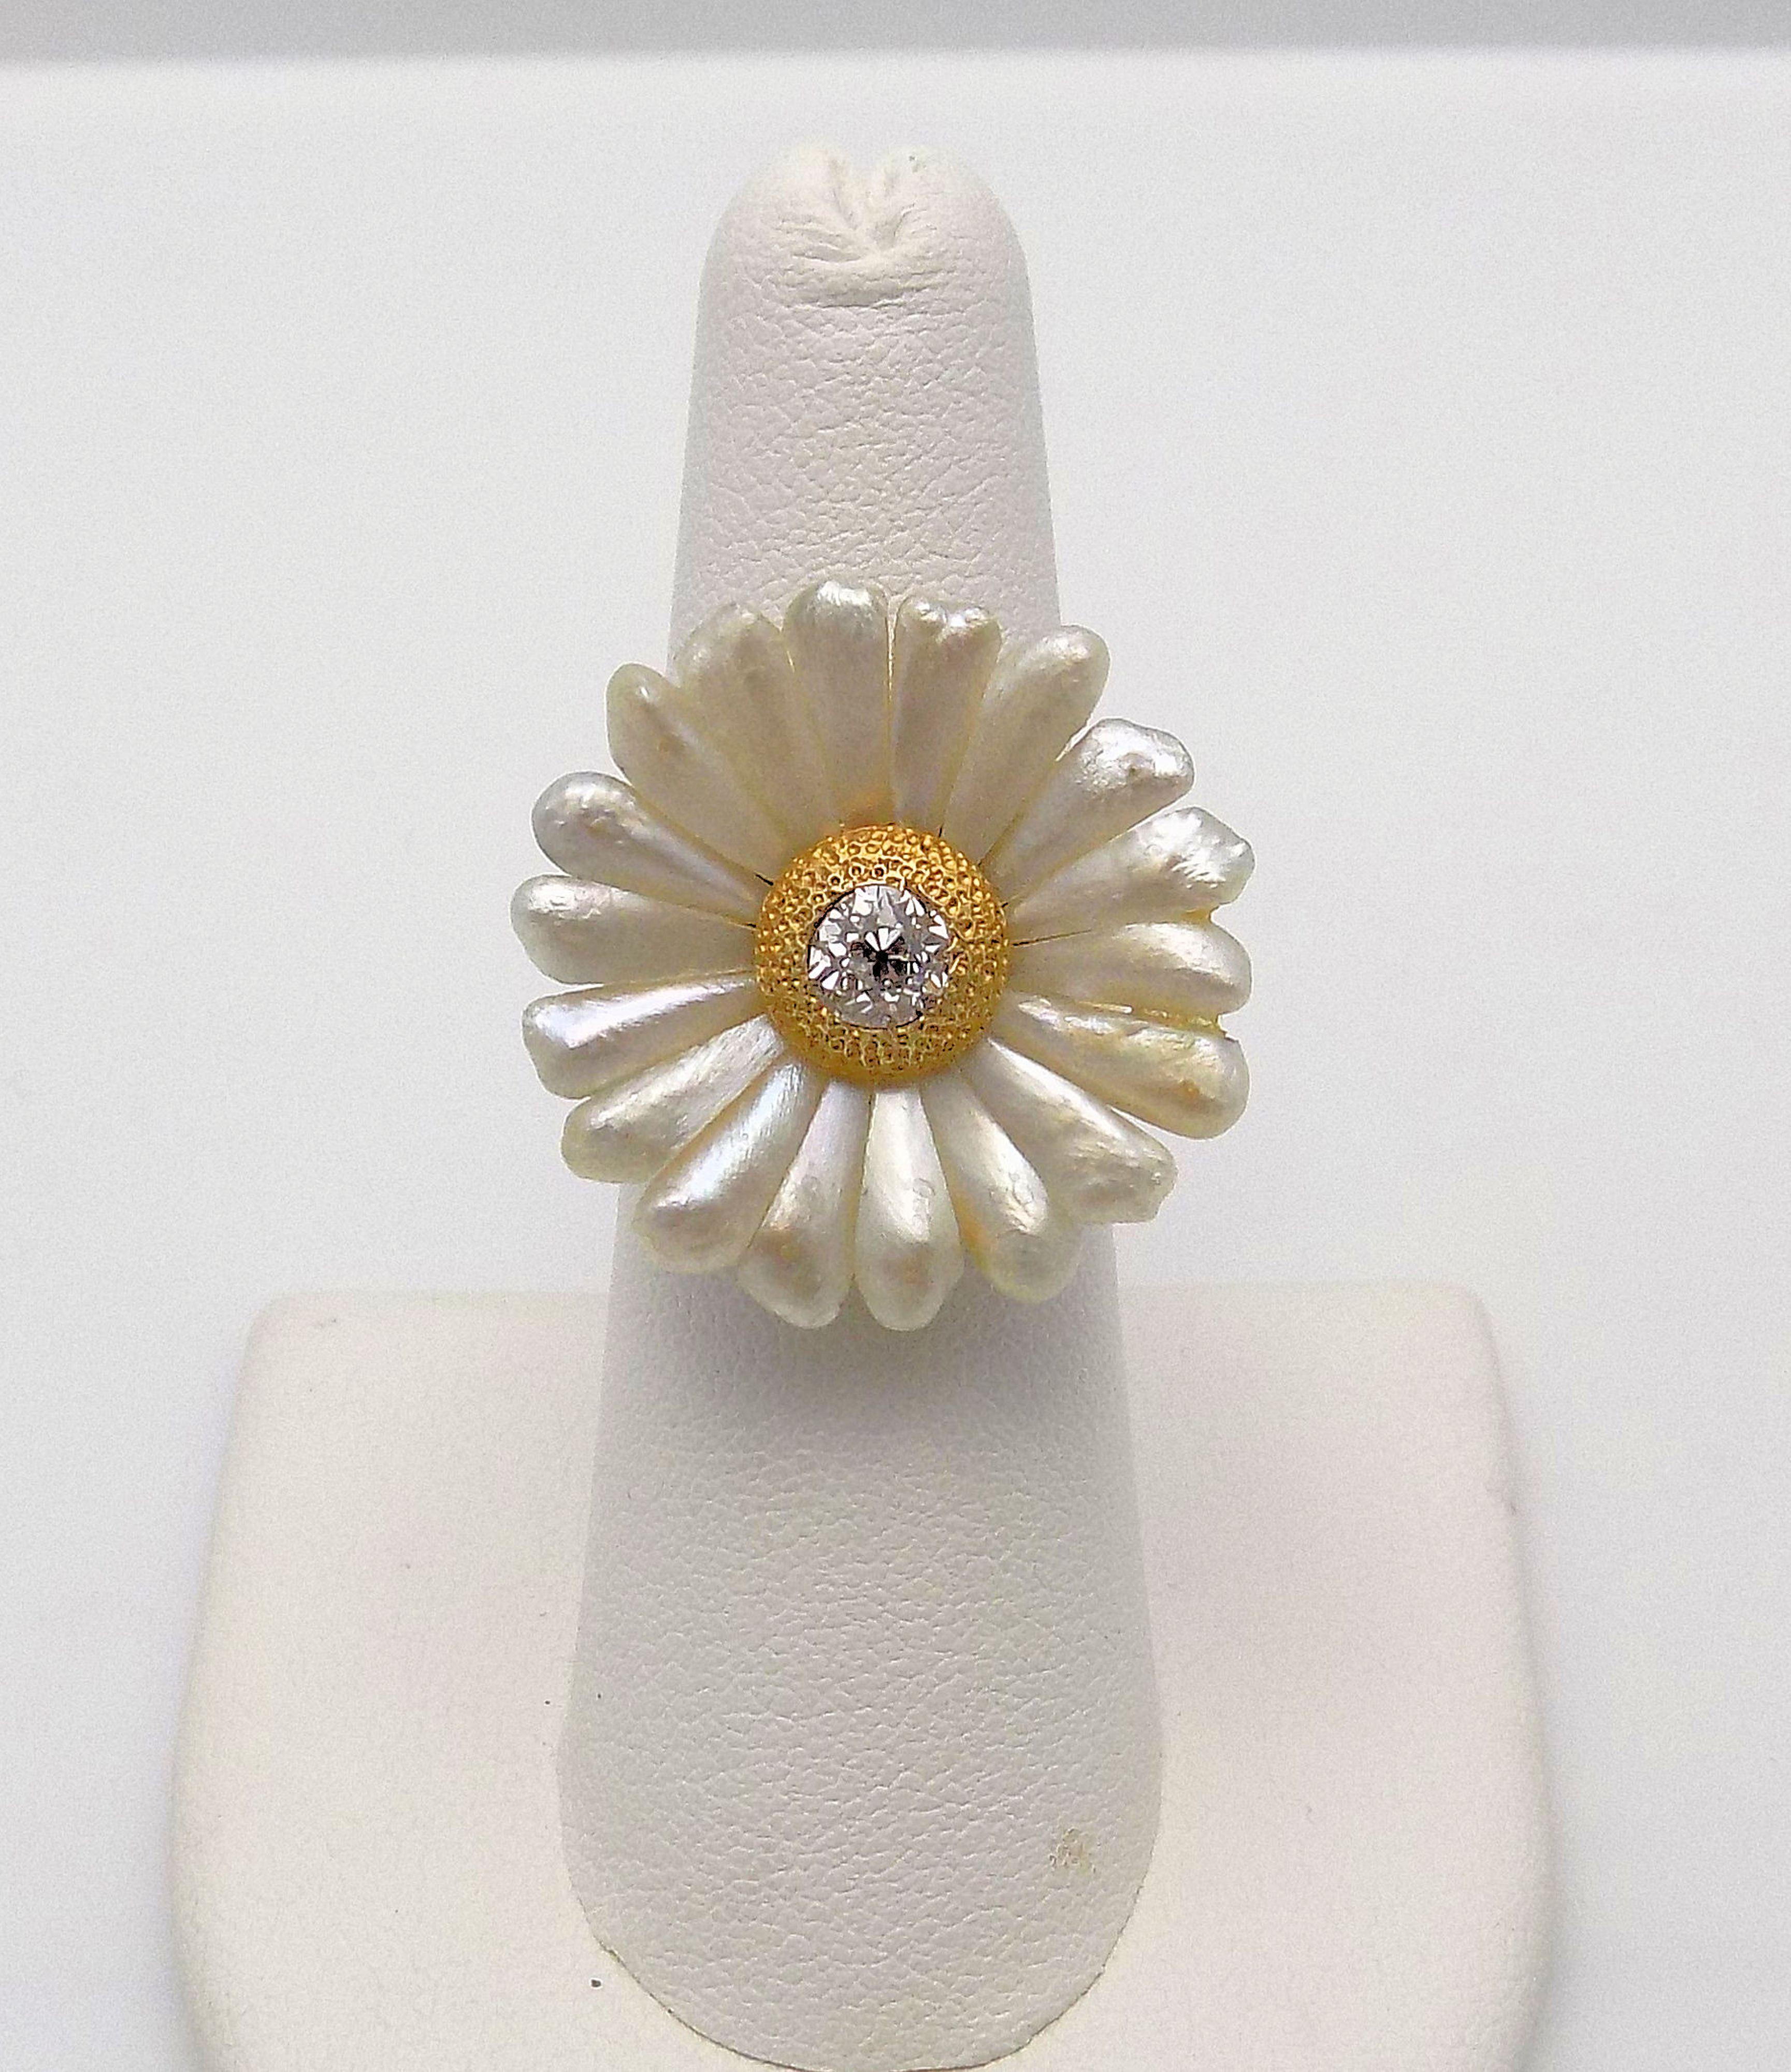 Delightfully Charming 14 Karat Yellow Gold Ring with Antique Ornamentation.  Daisy Motif Set with 18 American Fresh Water Pearls and Center European Cut Diamond 0.25 CT. SI-1, H-I. New Shank; Ring Size/Finger Size 6.  7.5 DWT or 11.66 Grams.